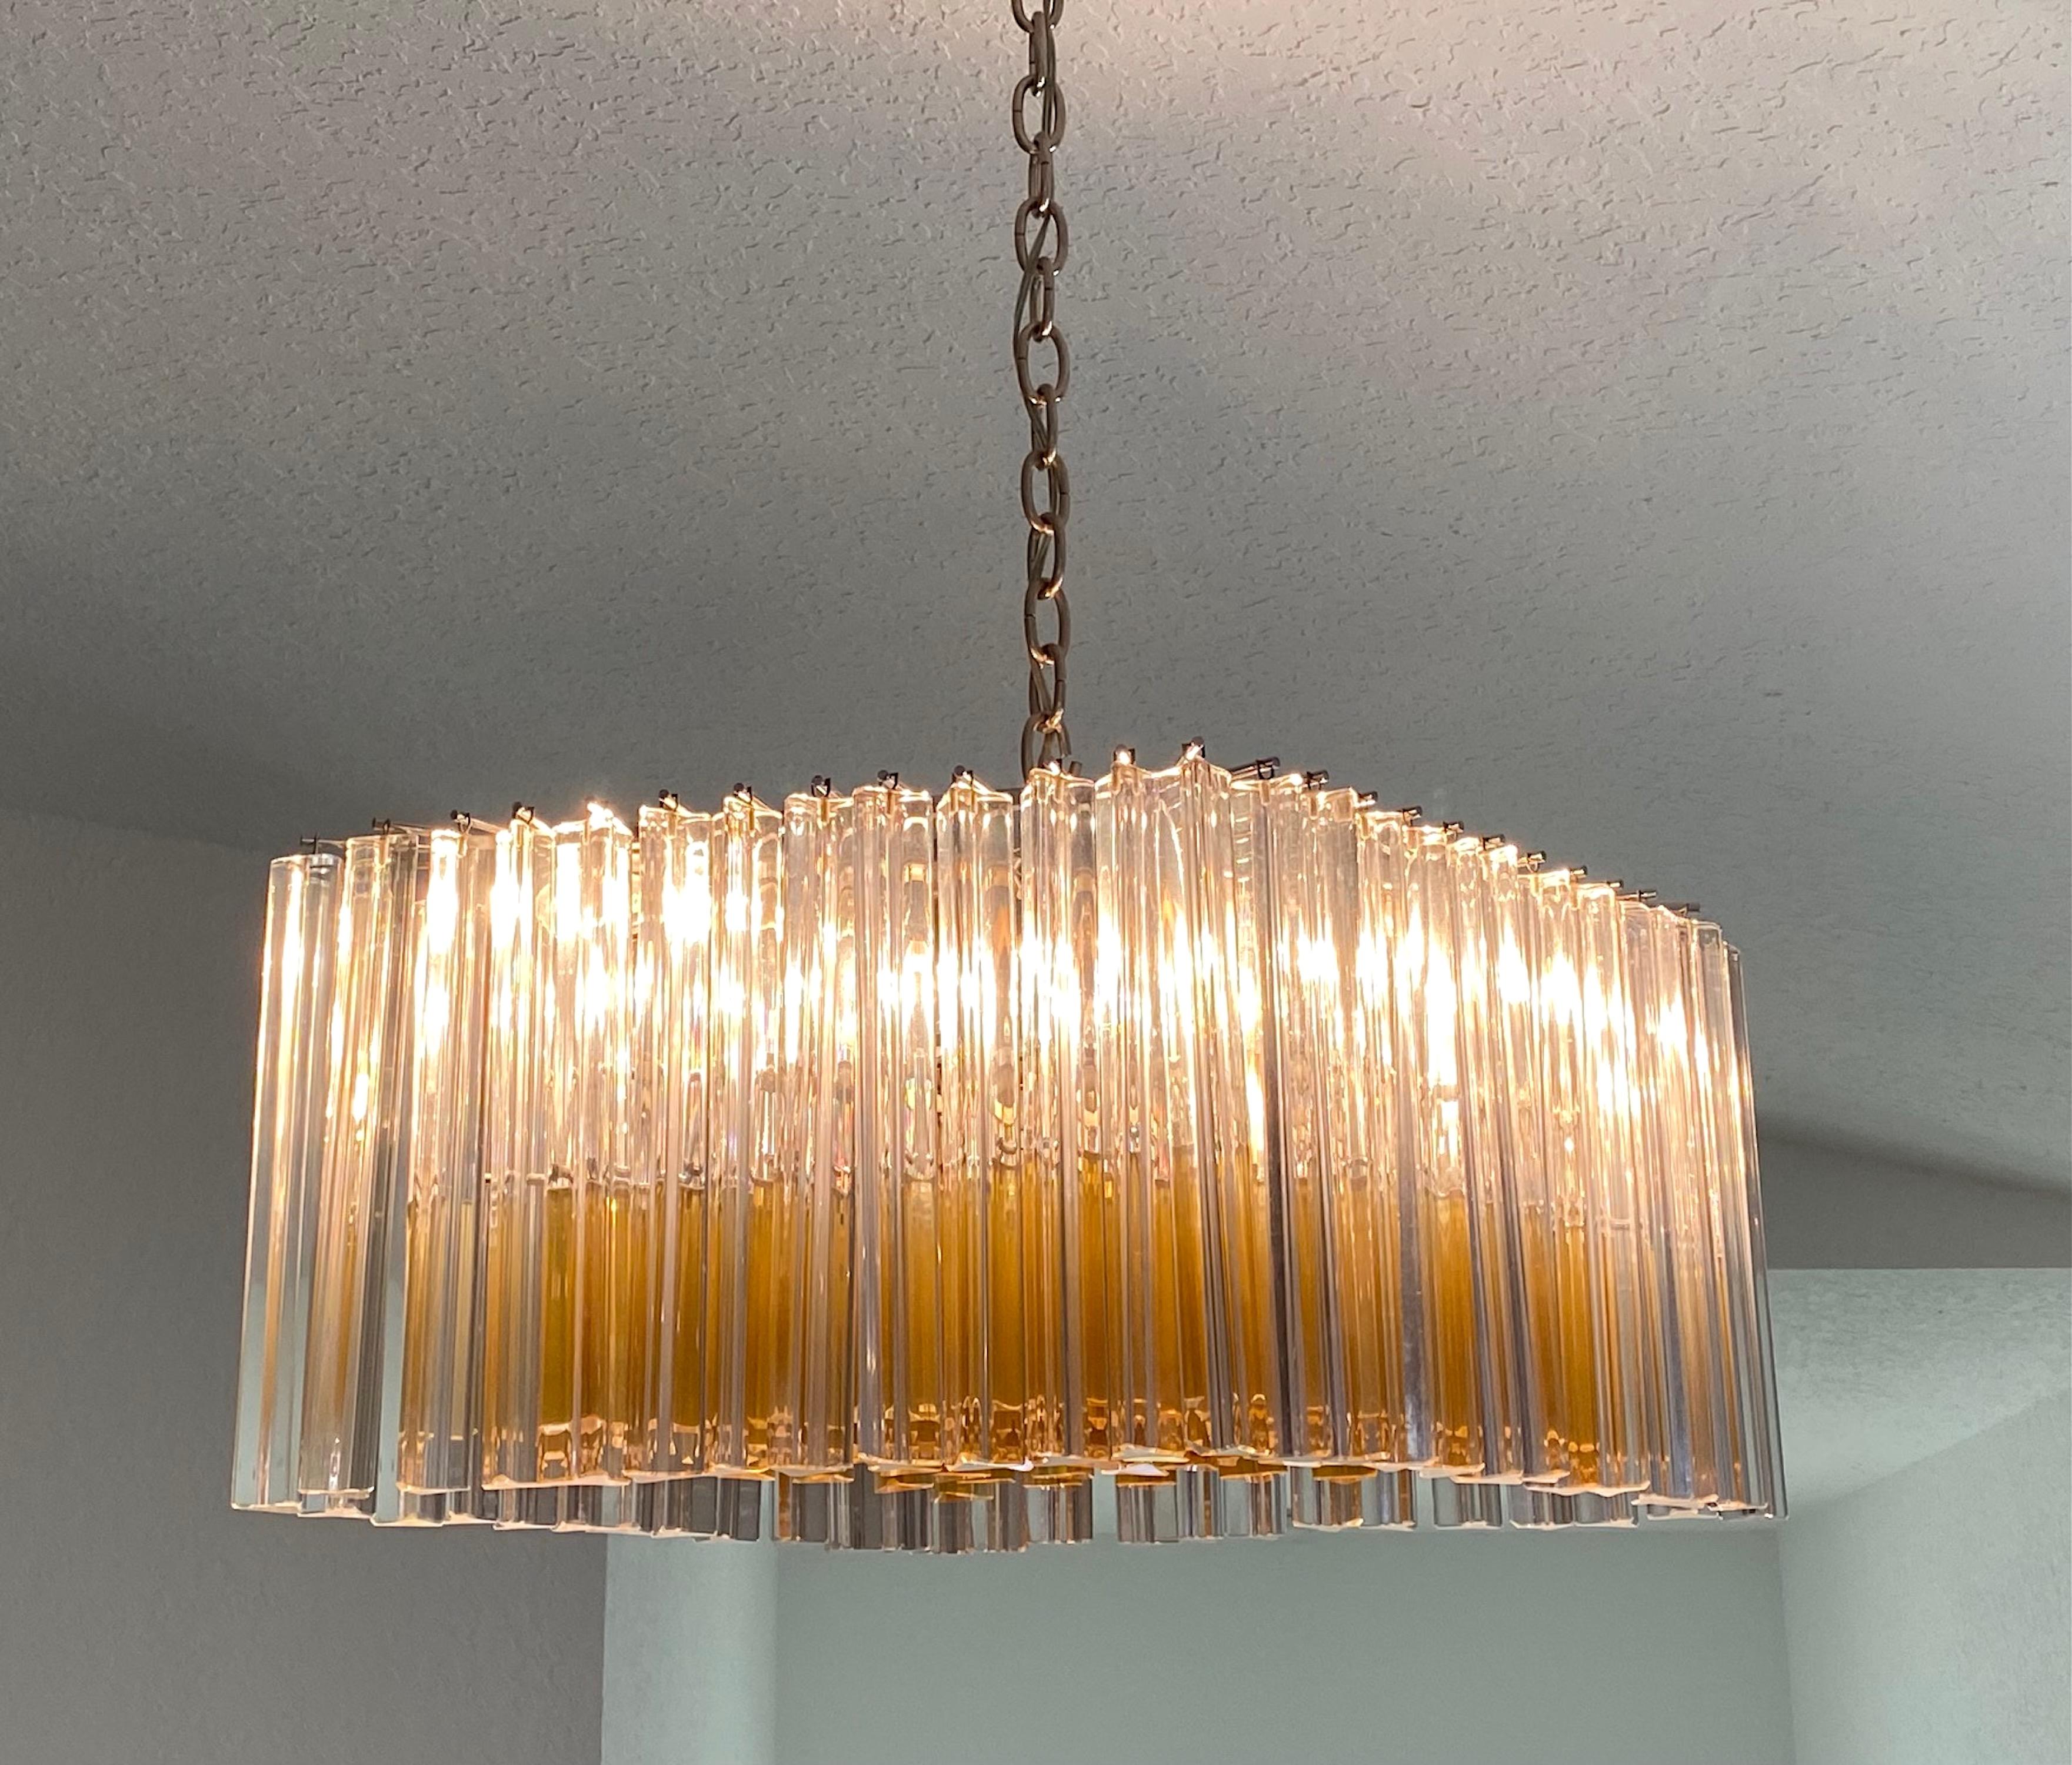 Magnificent circa 1970 Italian Venini Chandelier, with Trilobi glass bars in clear and long color in the outside row, and amber short  color bars completing all the bottom center part, Italy.
The Chandelier has a rhomboidal  shape, with short and